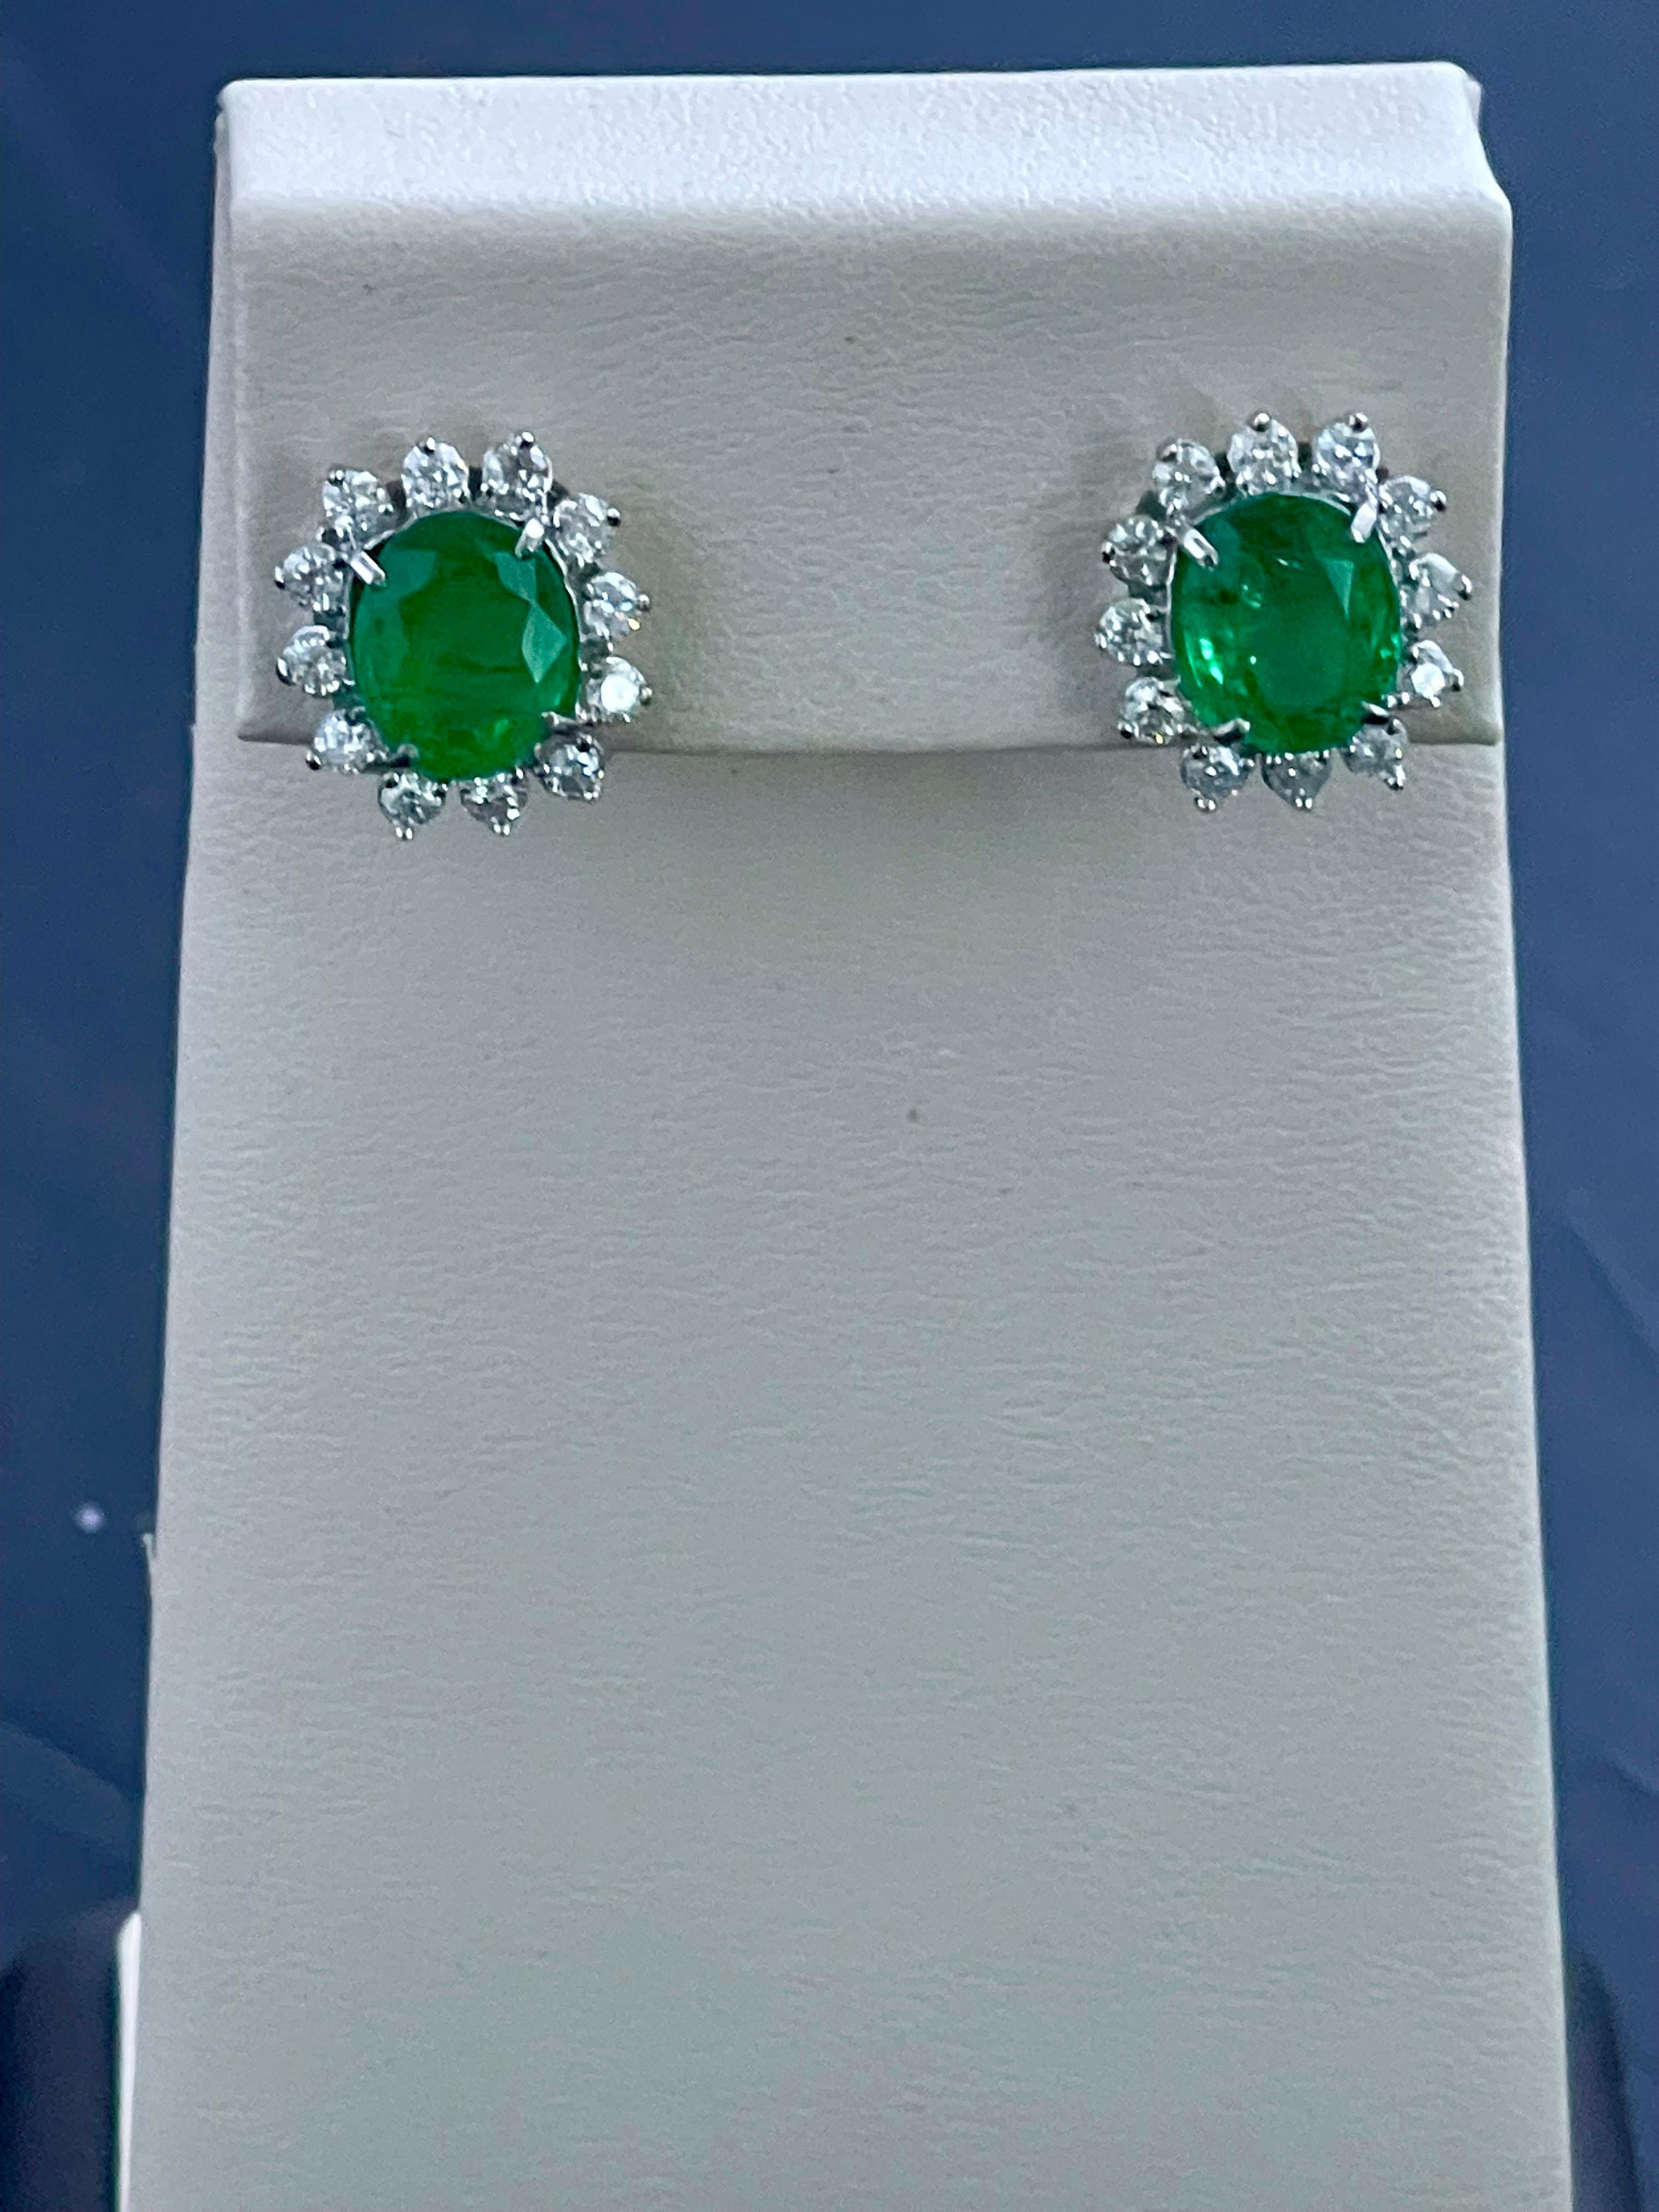 8 Ct Oval Colombian Emerald & 2.5 Ct Diamond Post Back Earrings 18 Kt White Gold For Sale 5